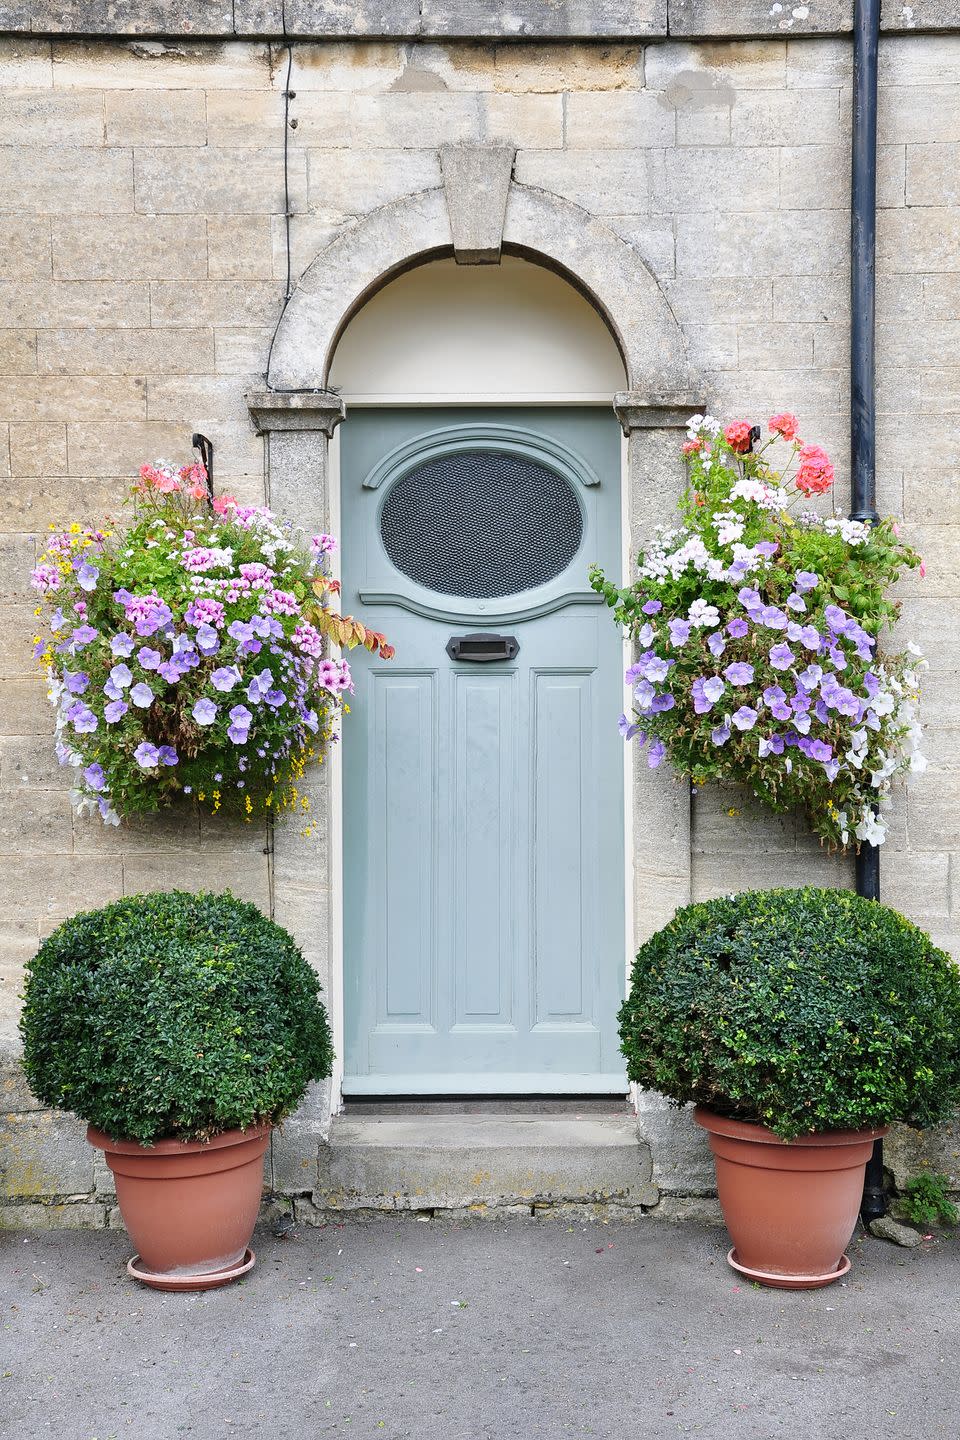 <p>The nation is putting its gardening skills front of show with a focus on <a href="https://www.housebeautiful.com/uk/garden/designs/how-to/a780/front-garden-guide/" rel="nofollow noopener" target="_blank" data-ylk="slk:front doors and front gardens" class="link ">front doors and front gardens</a>, says Wyevale. Over 40 per cent of Brits now feature hanging baskets in their front garden, and city-dwellers in the capital are on average three times more likely to feature <a href="https://www.housebeautiful.com/uk/garden/plants/advice/a1449/best-plants-patio-containers-windowboxes-easter-spring/" rel="nofollow noopener" target="_blank" data-ylk="slk:window boxes" class="link ">window boxes</a> at the front of their home compared to residents in other areas of the country. </p><p>Wyevale says: ‘Sales are soaring for plants that can be bought in pairs. Twin bay trees remain a favourite for adding structural impact, and new container-friendly bamboo varieties such as the red-stemmed Fargesia "Red Dragon" are coming this year. Increased volumes of evergreen box and topiary – in all shapes and sizes – are also being introduced to meet with growing demand.'</p>